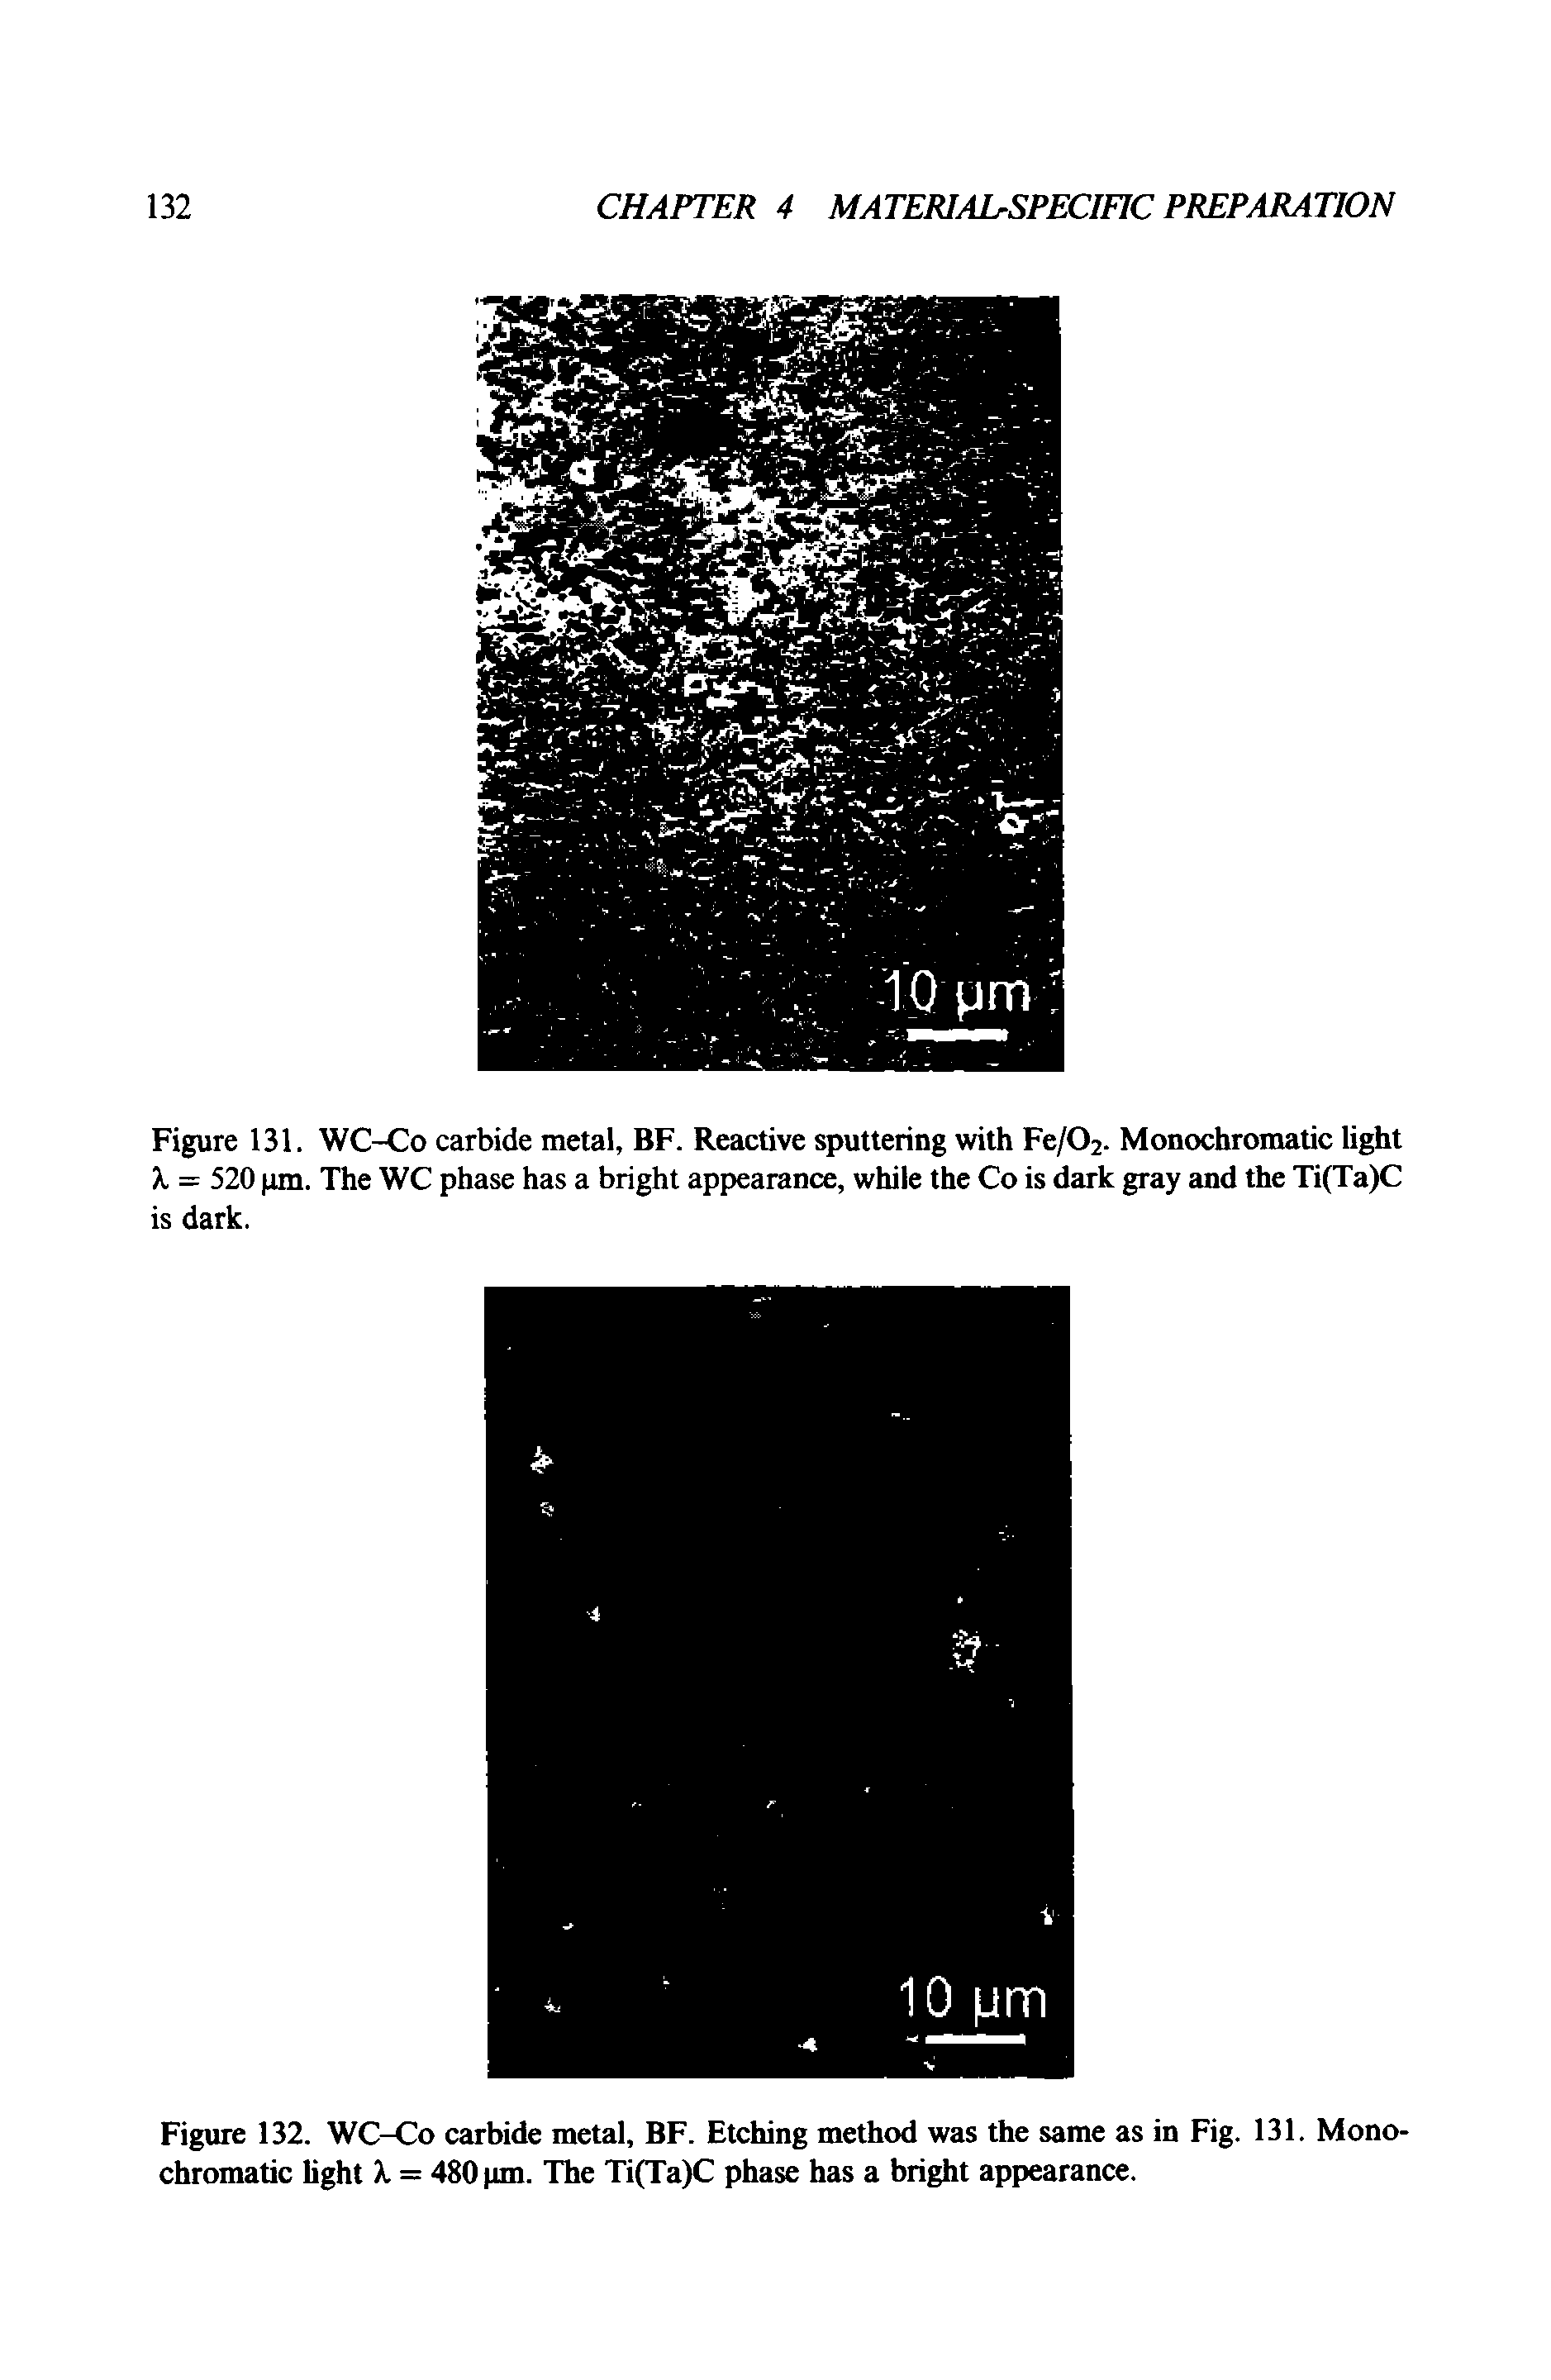 Figure 131. WC-Co carbide metal, BF. Reactive sputtering with Fe/02- Monochromatic light X = 520 pm. The WC phase has a bright appearance, while the Co is dark gray and the Ti(Ta)C is dark.